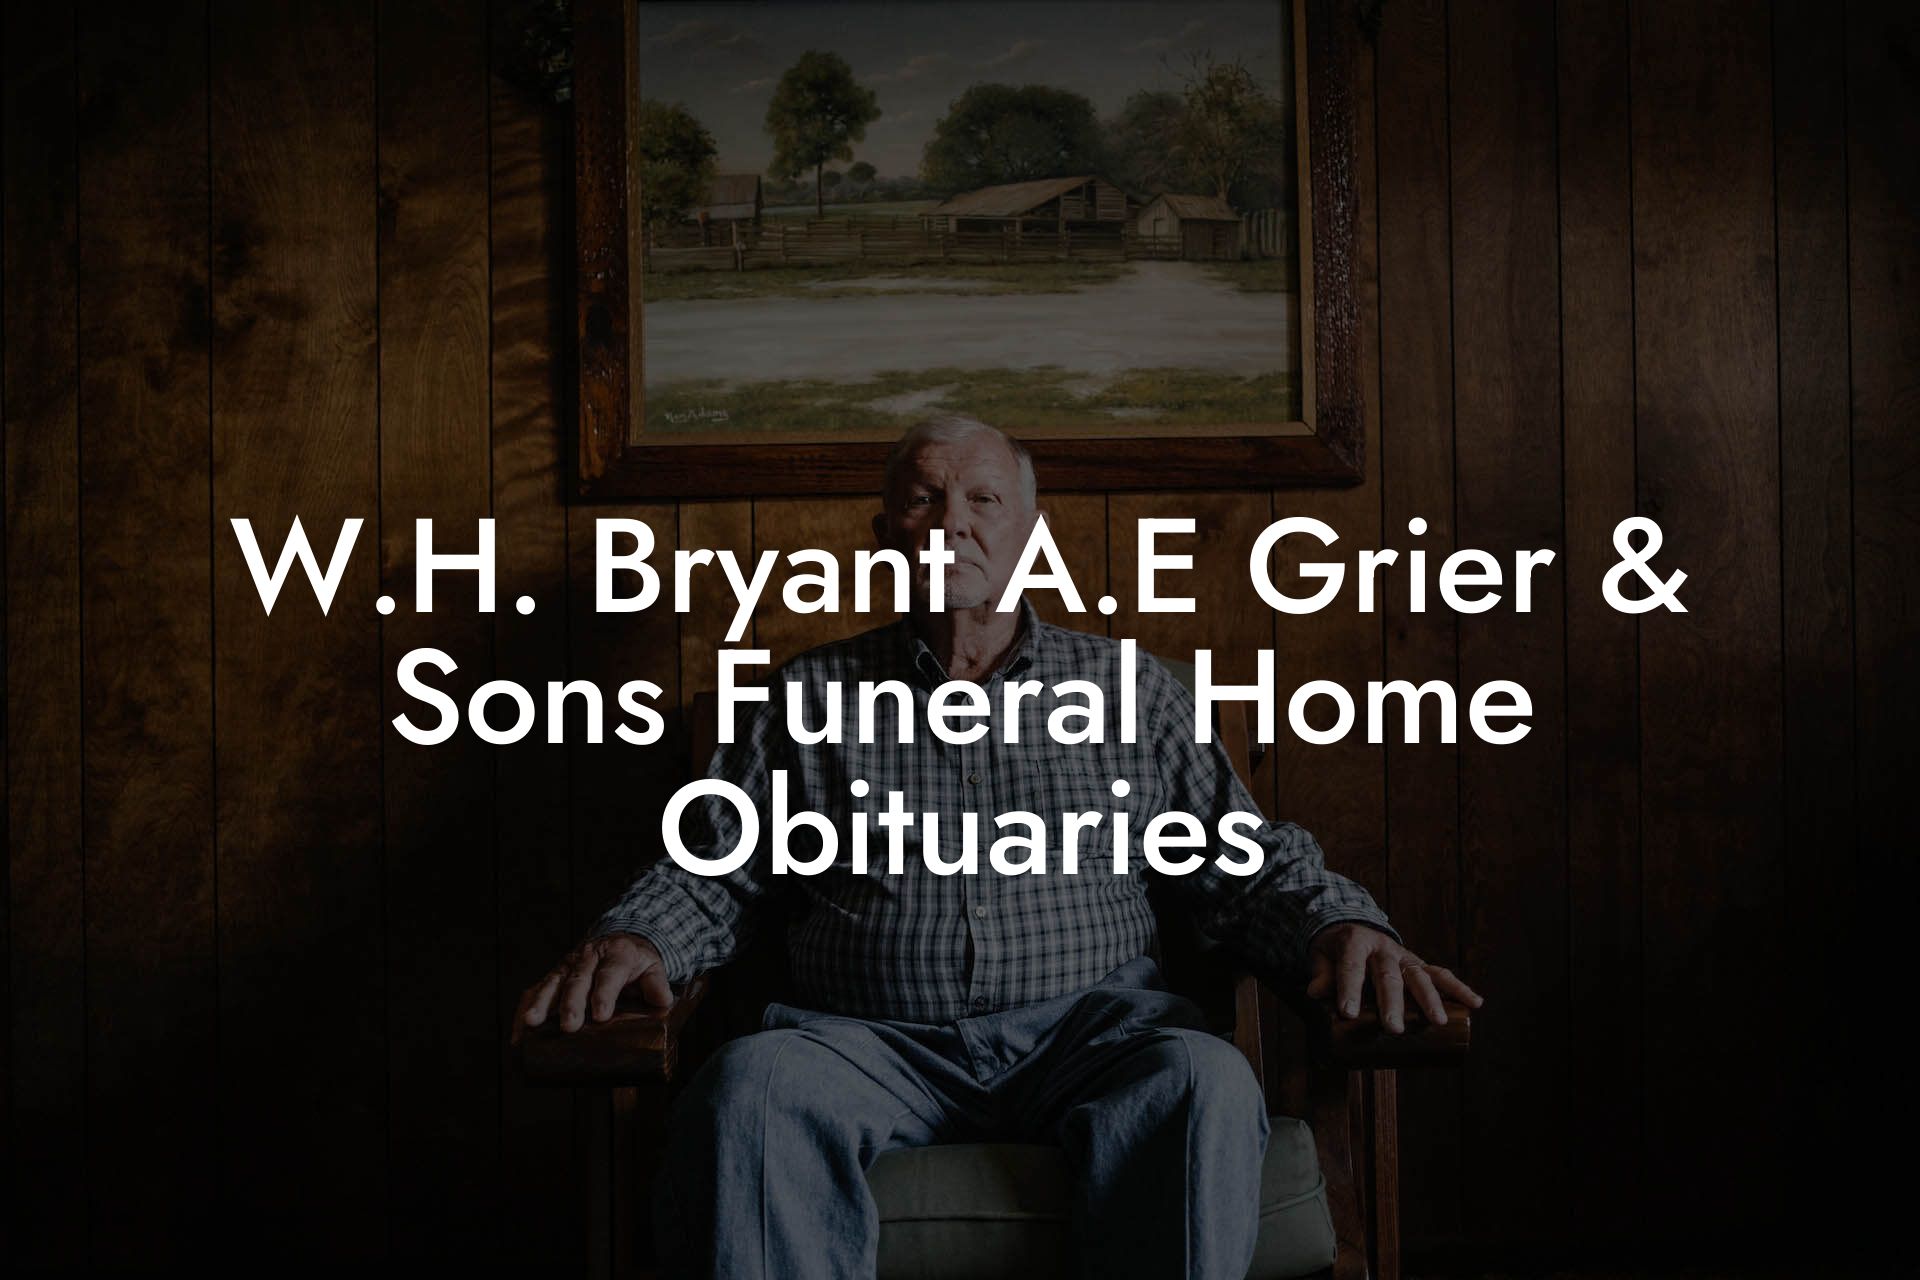 W.H. Bryant A.E Grier & Sons Funeral Home Obituaries